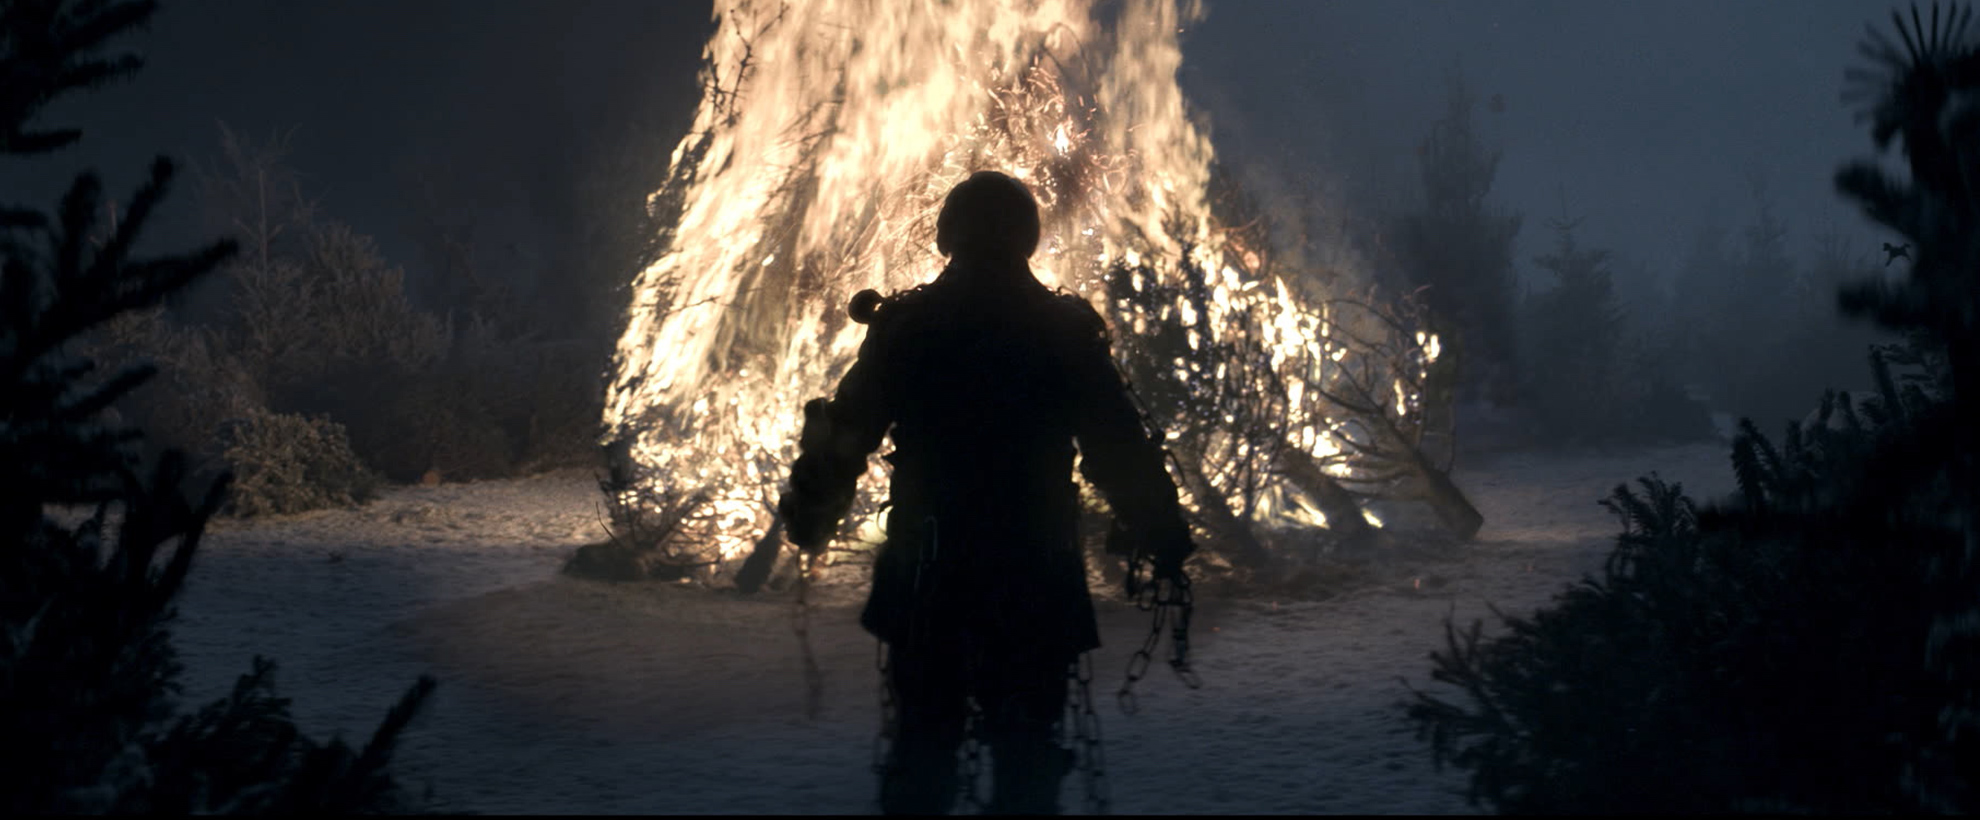 A raggedy silhouette of a man in front of a large bonfire